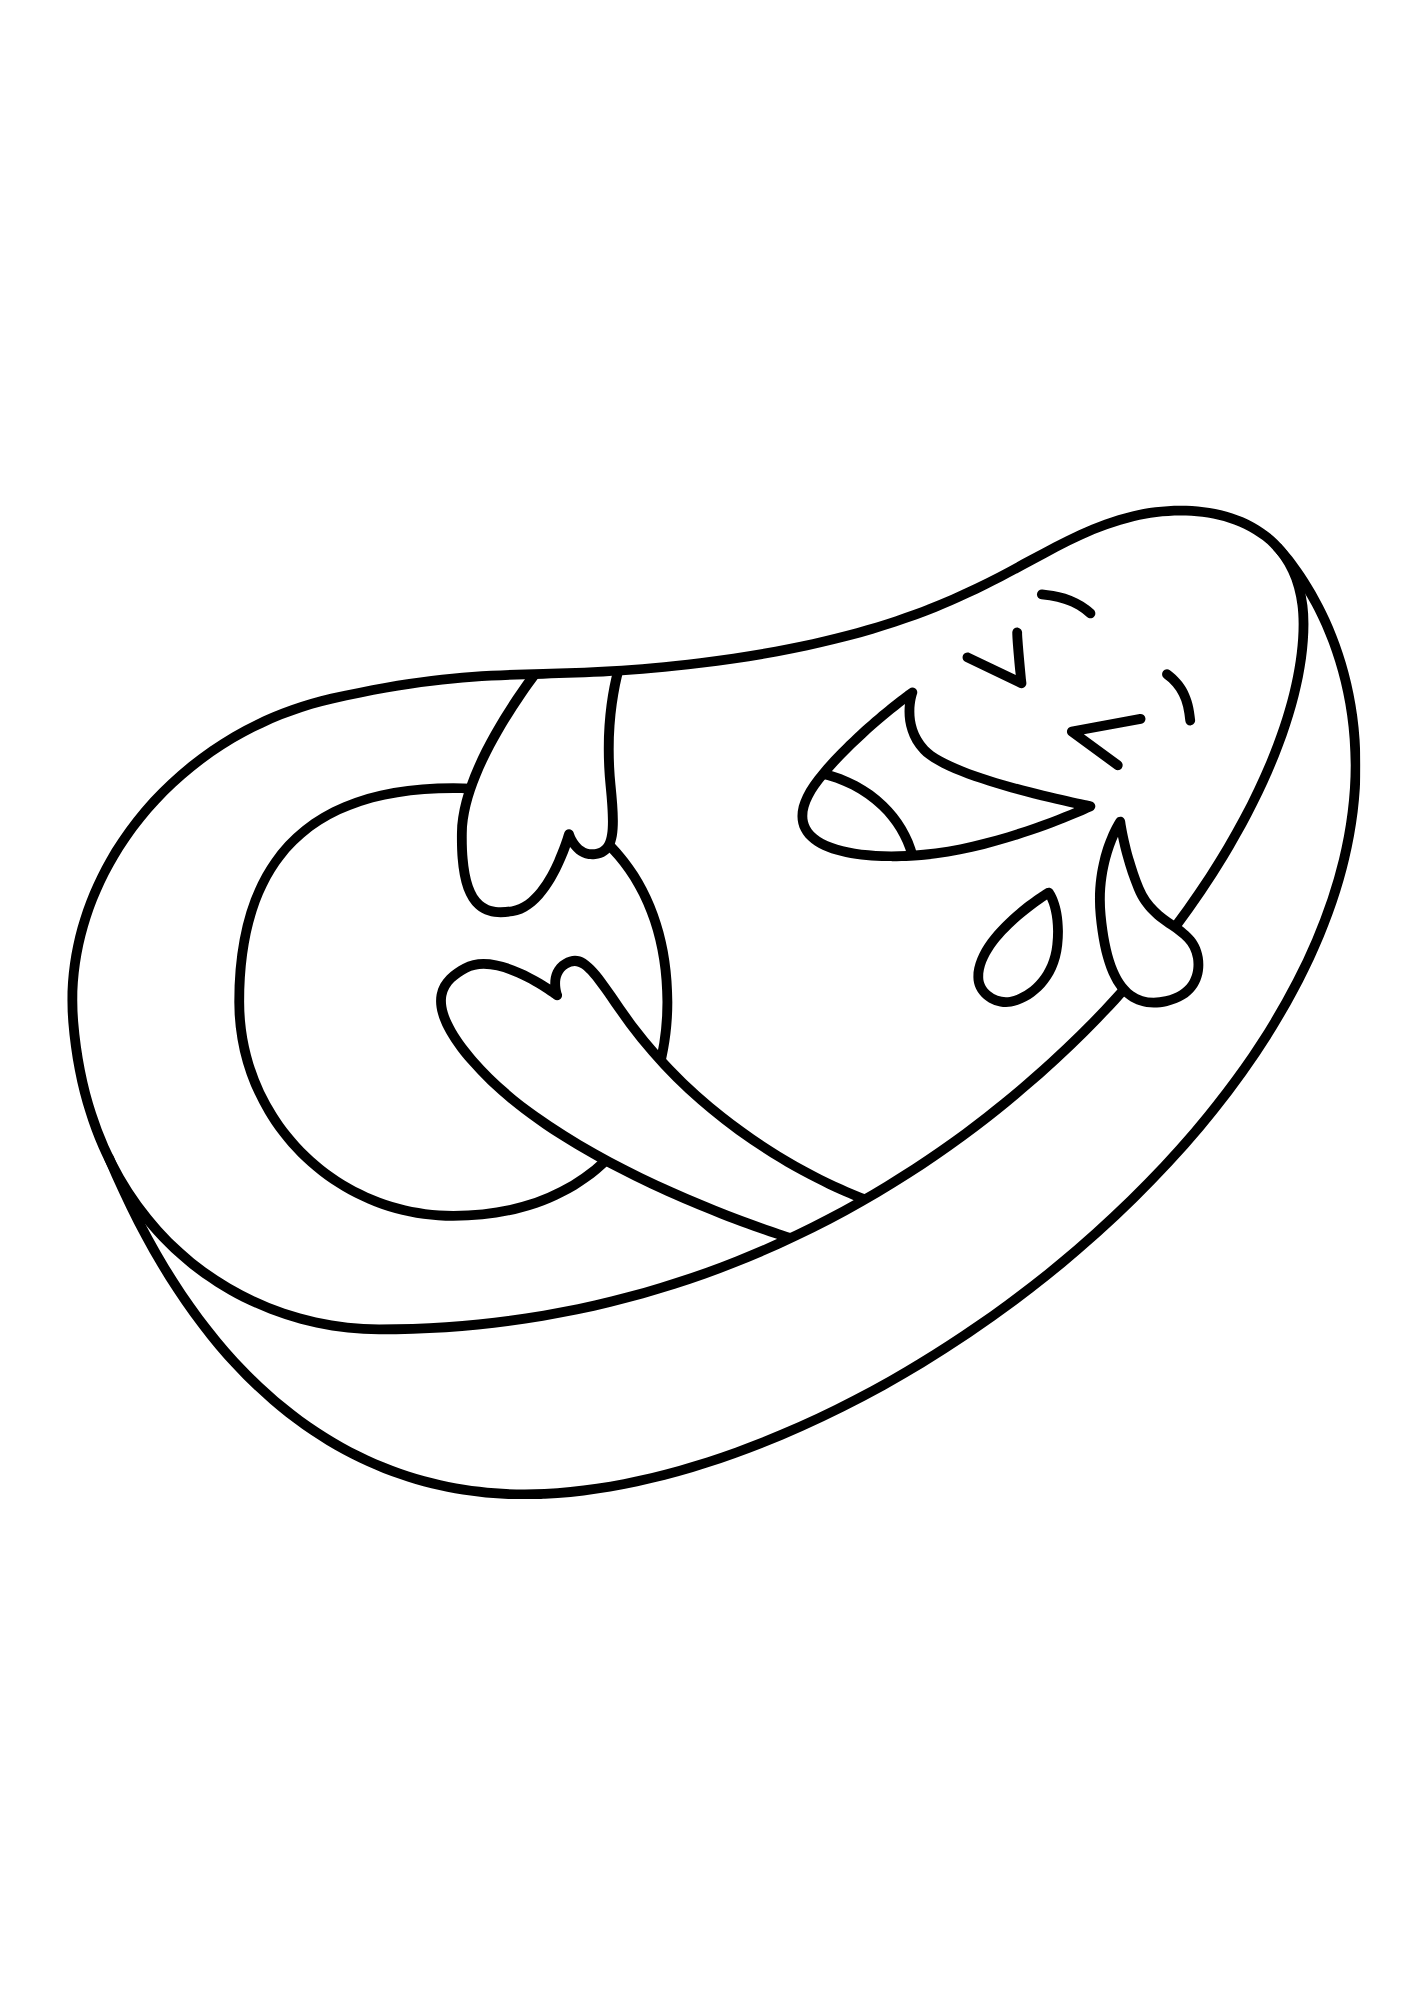 Avocado Smile Coloring Pages